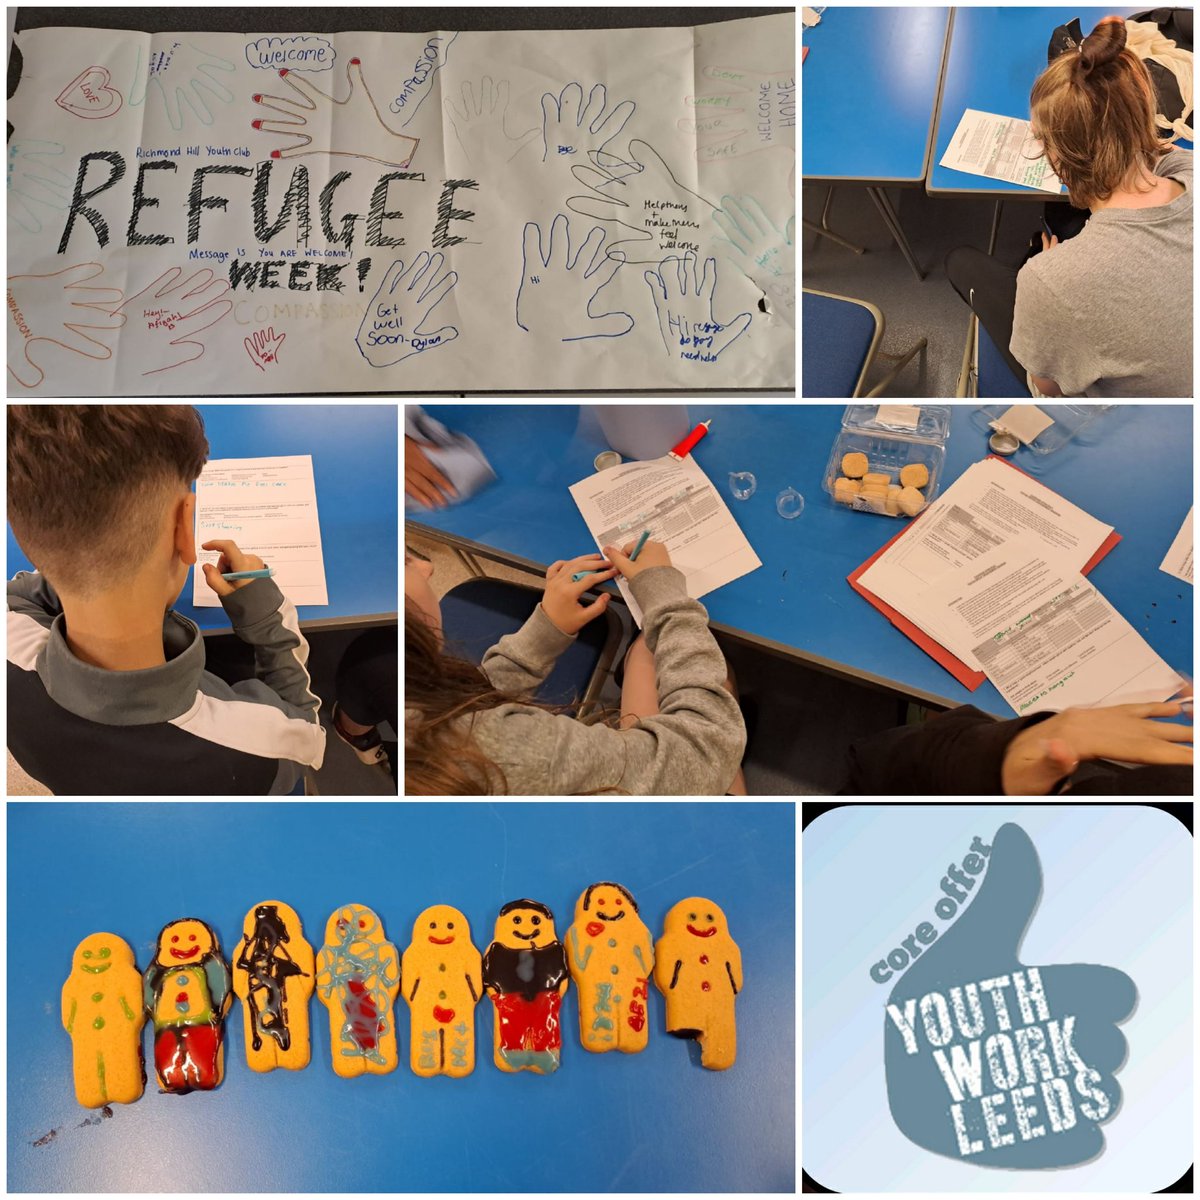 Some great sessions over the past few weeks to facilitate #awareness #understanding and #educstion  as we celebrated  #refugeeweek with #Youngpeople from across #Leeds 

#Youthwork
#LeedsYouthService